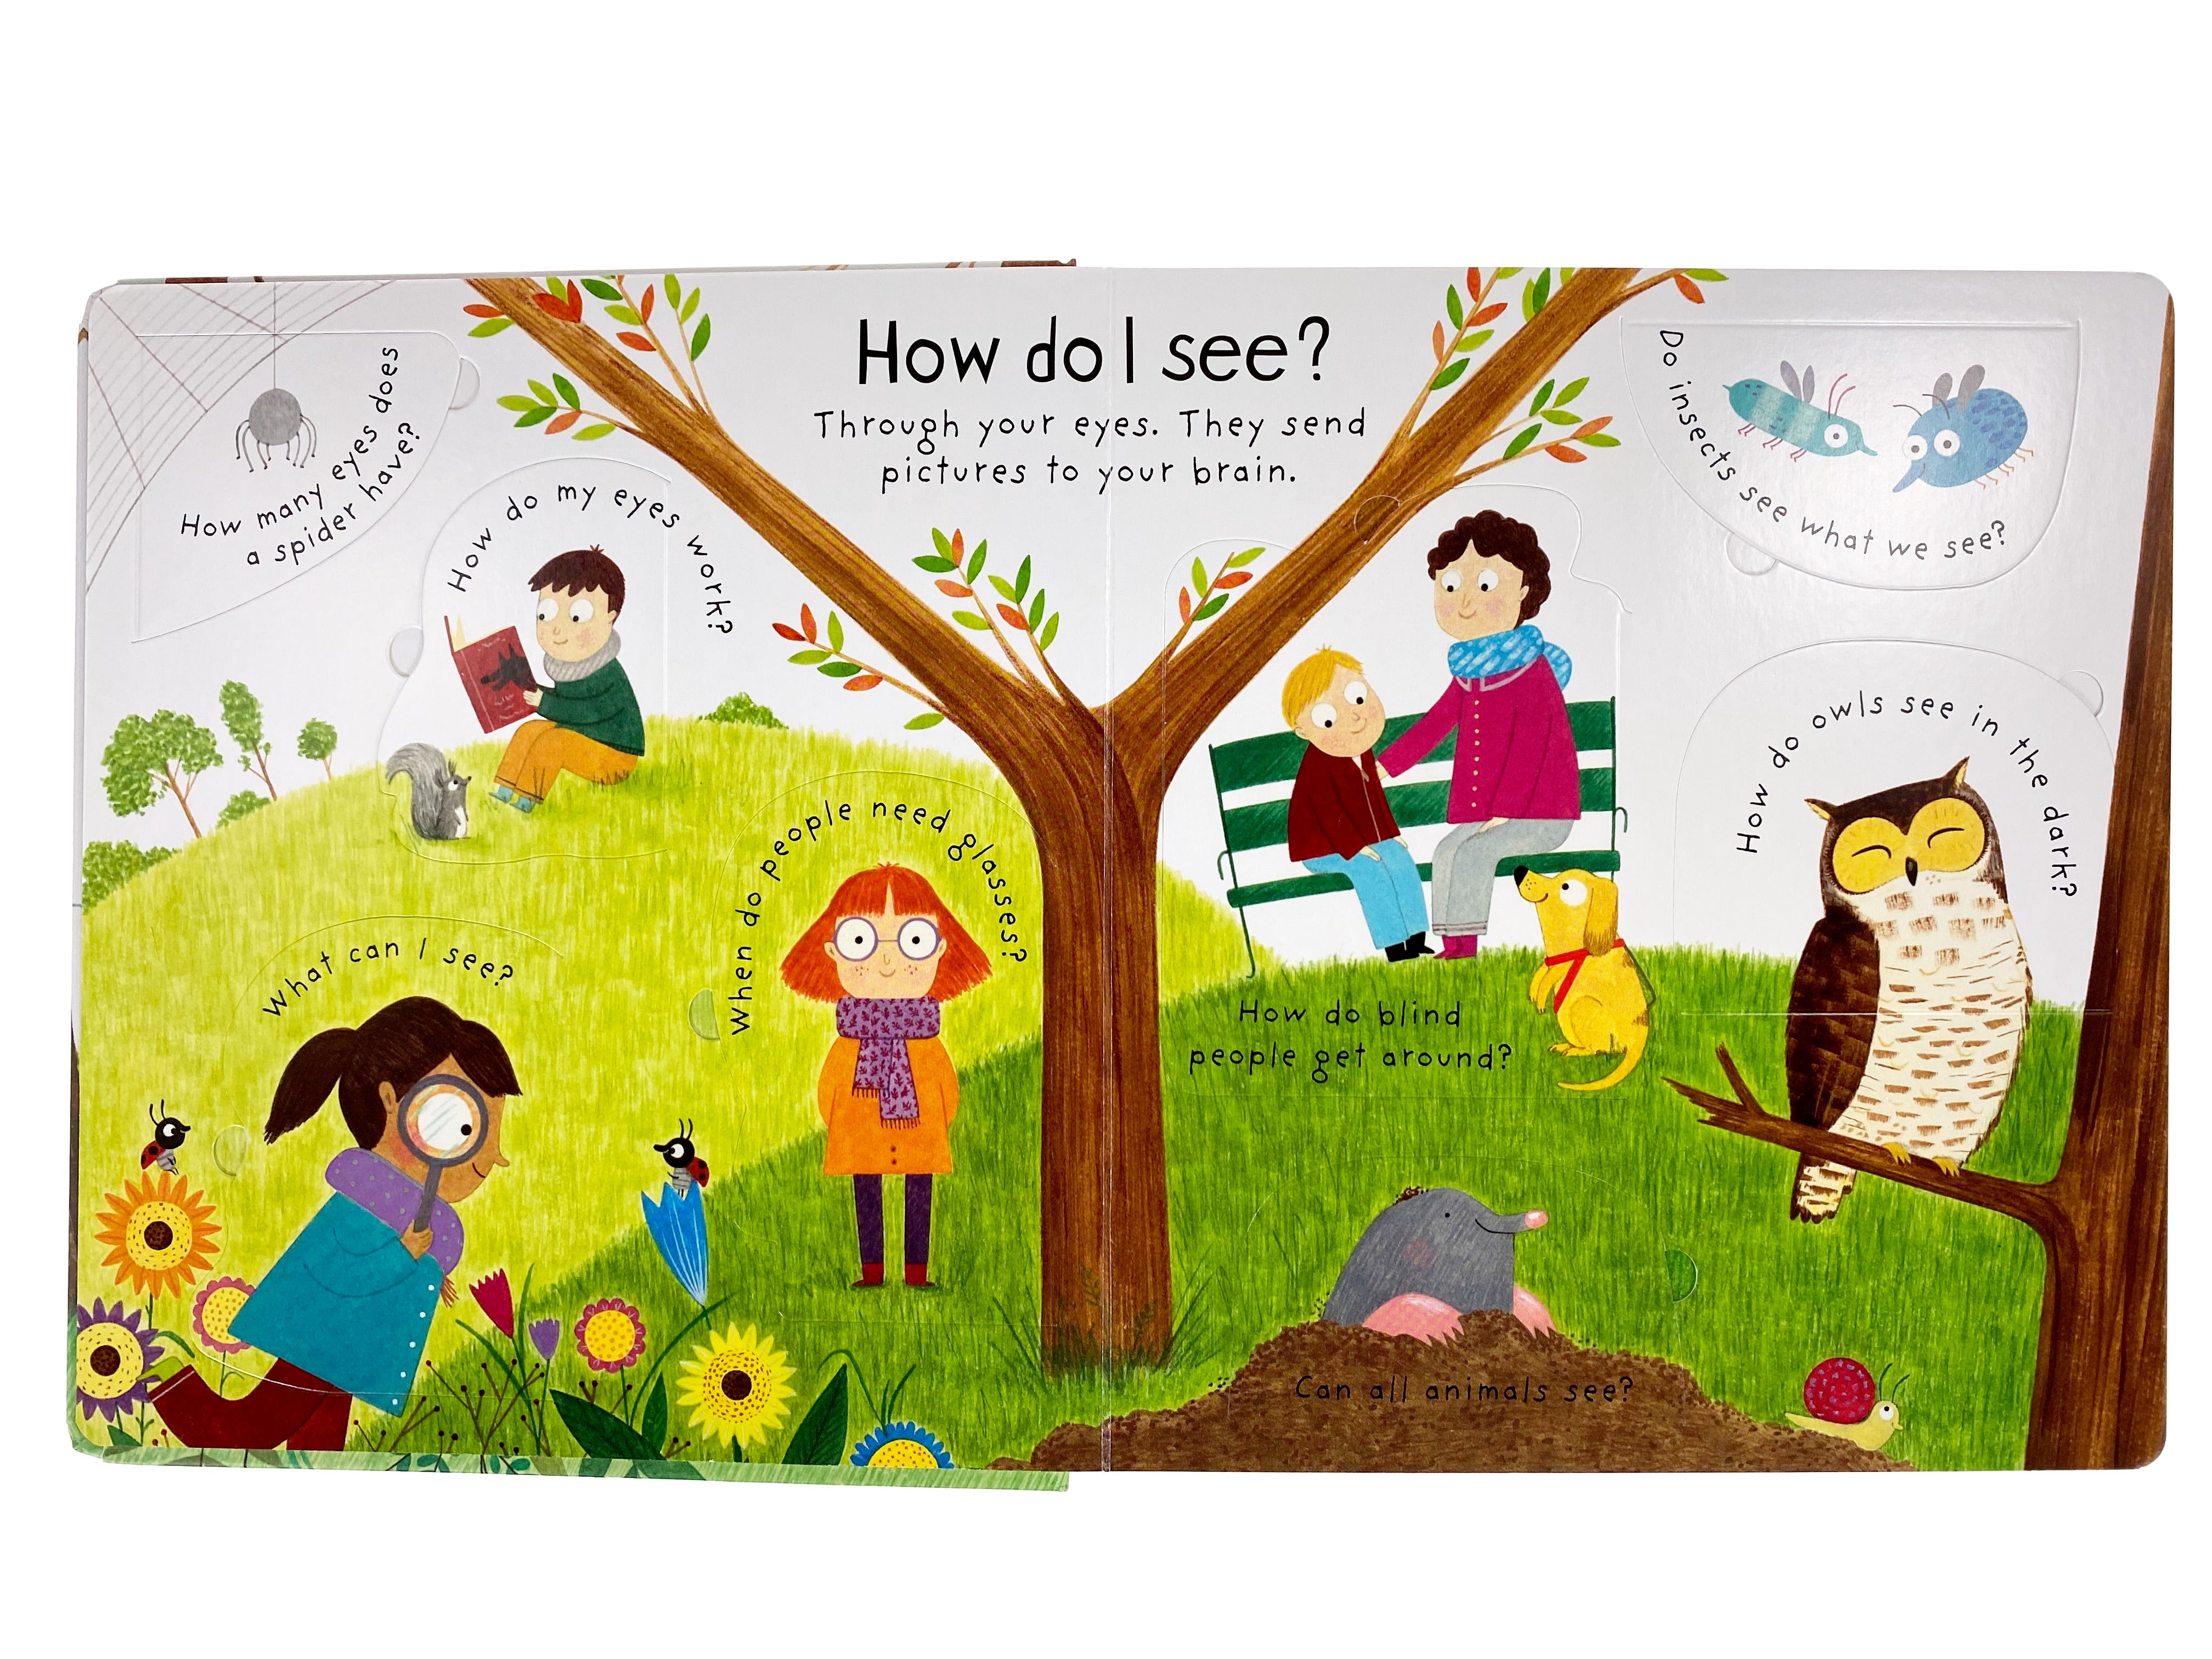 How Do I See? - Lift the Flap First Questions and Answers    